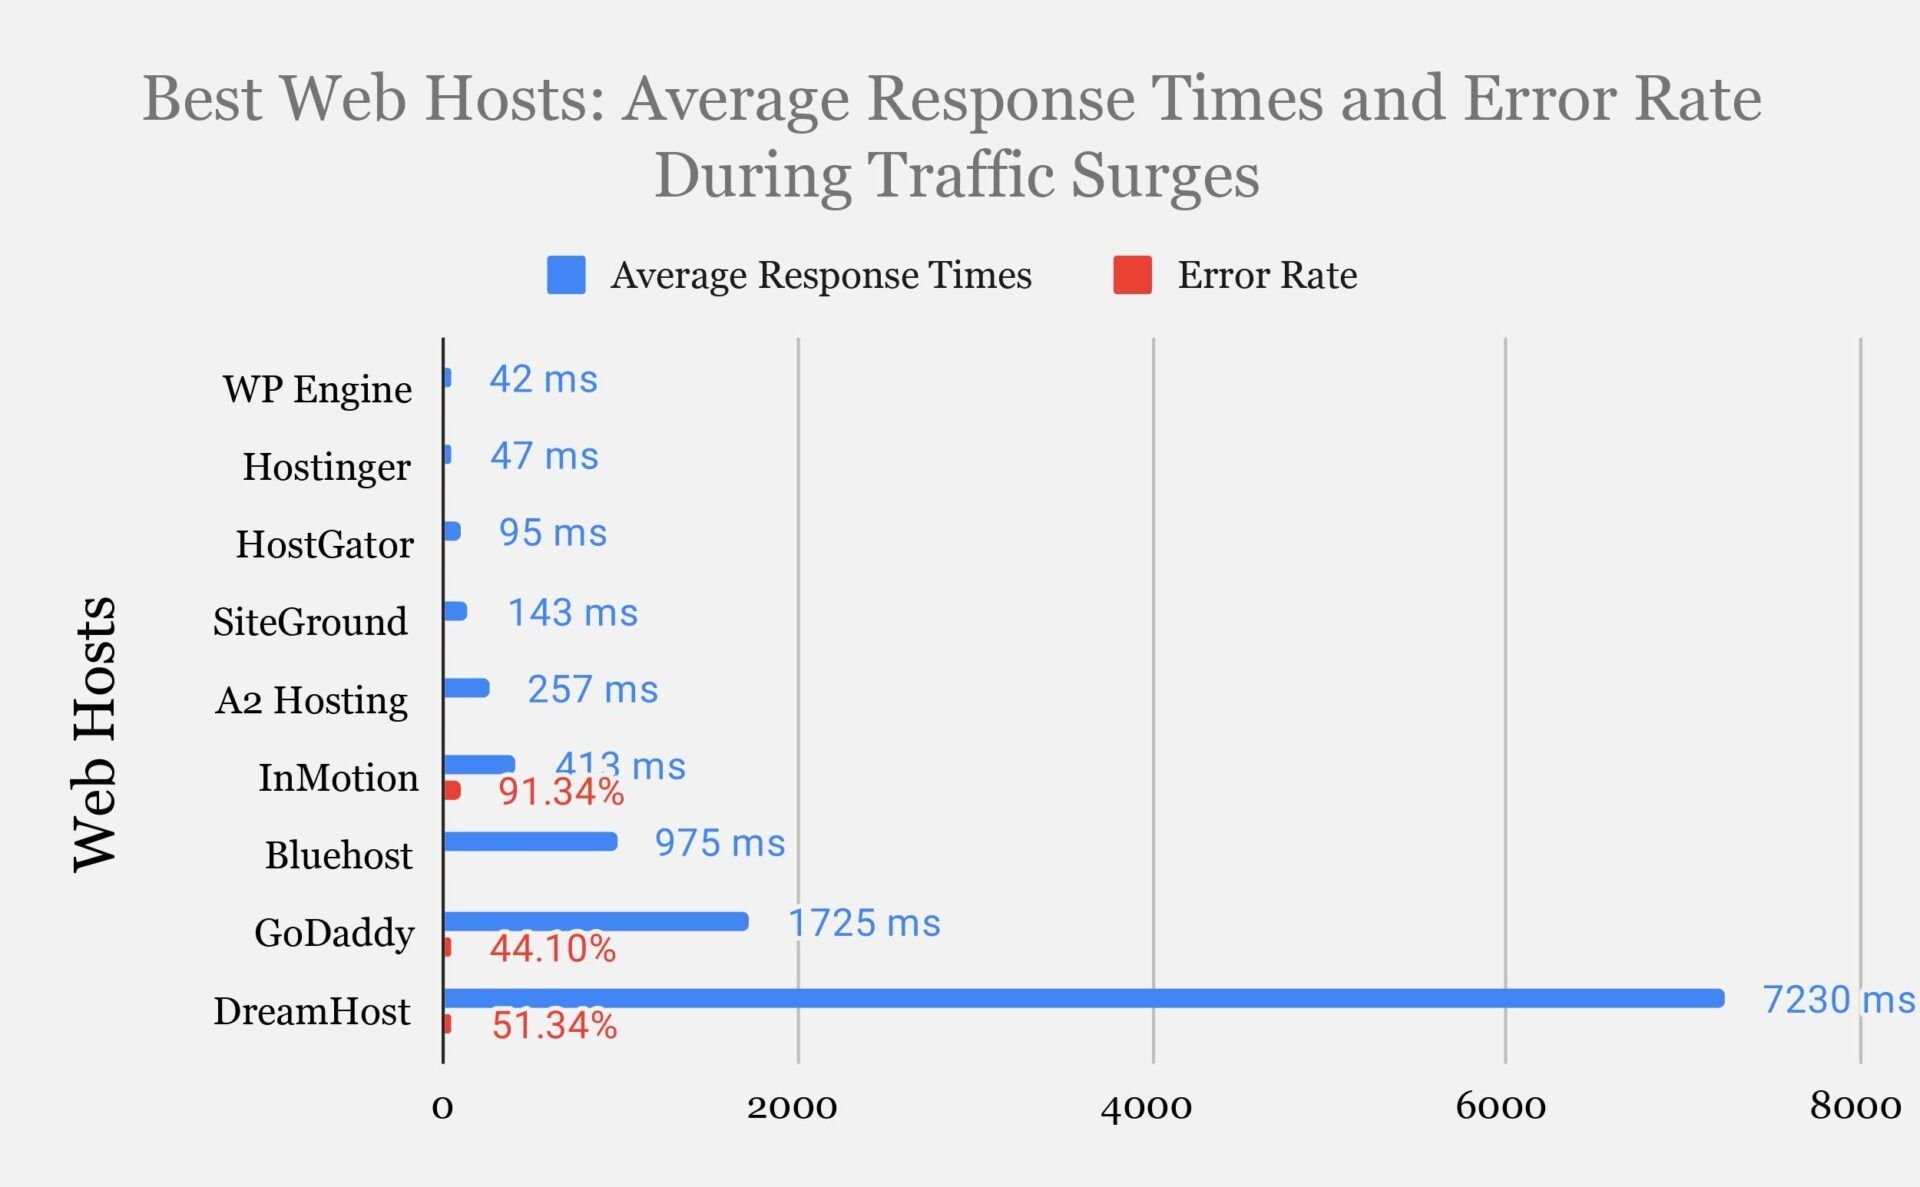 Best Web Hosts Average Response Times During Traffic Surges